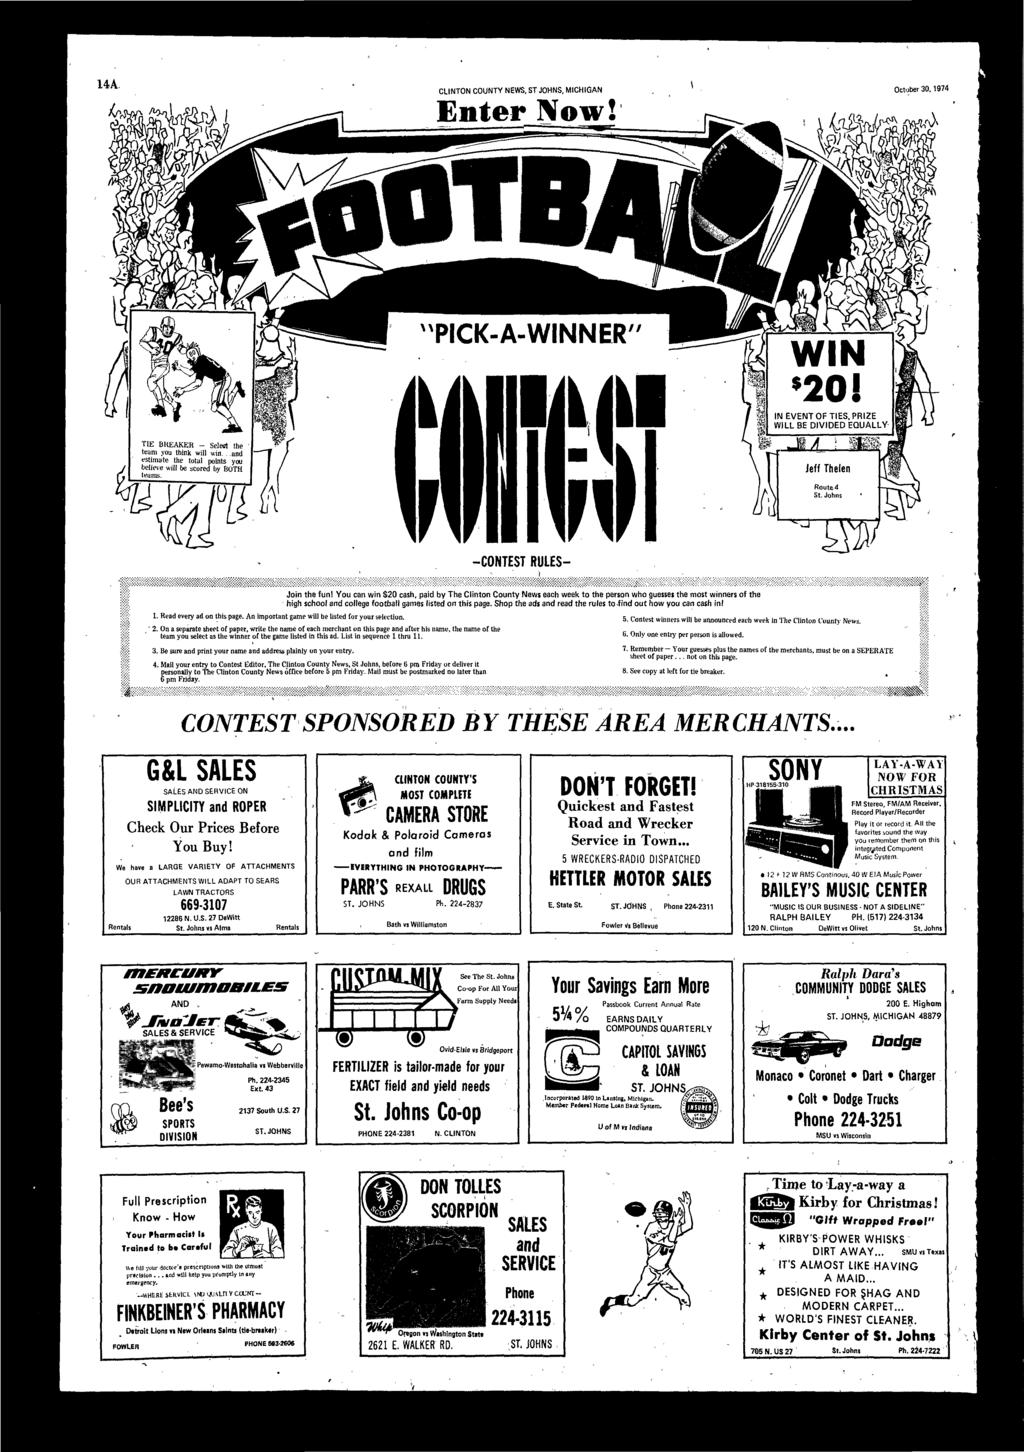 -CONTEST RULES- Join the fun! You cn win $20 csh, pid by The Clinton County News ech week to the person who guesses the most winners of the high school college footbll gmes listed on this pge.